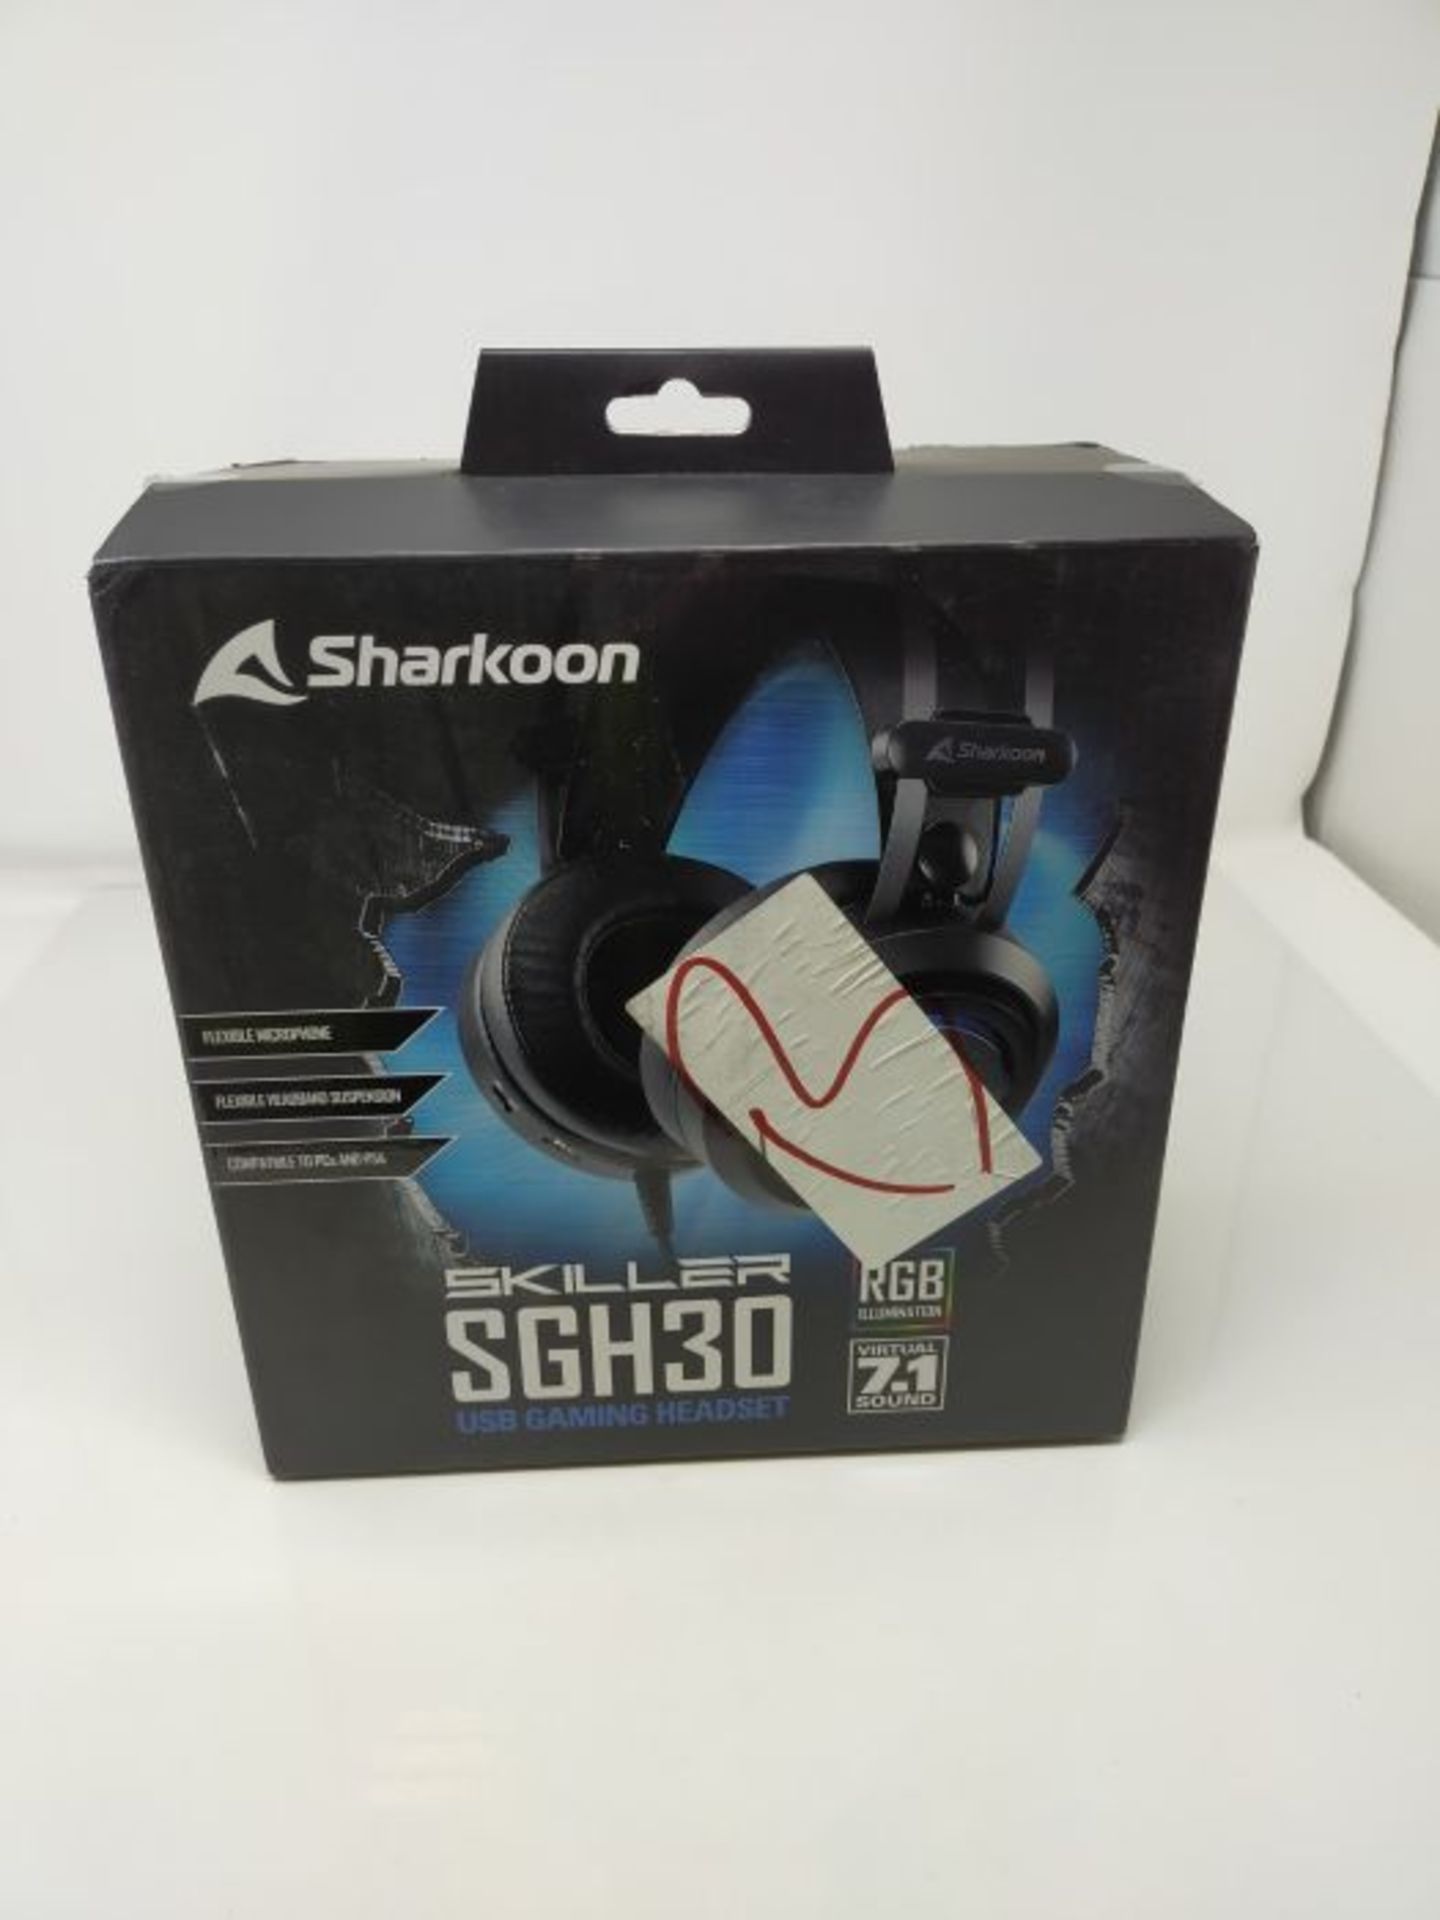 Sharkoon SKILLER SGH30 Gaming Headset - Image 2 of 3